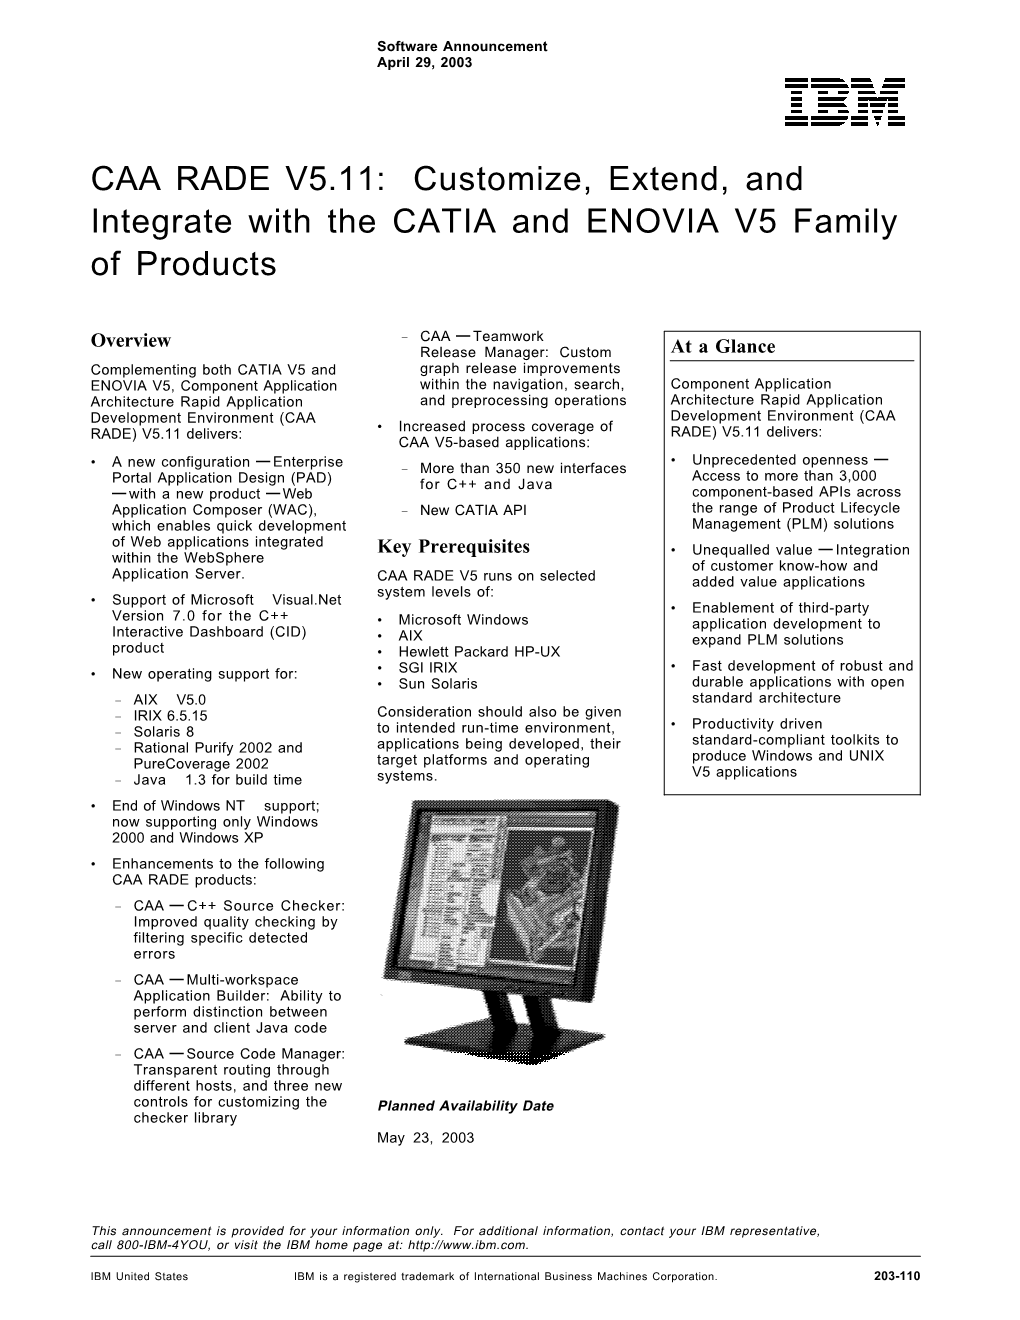 CAA RADE V5.11: Customize, Extend, and Integrate with the CATIA and ENOVIA V5 Family of Products